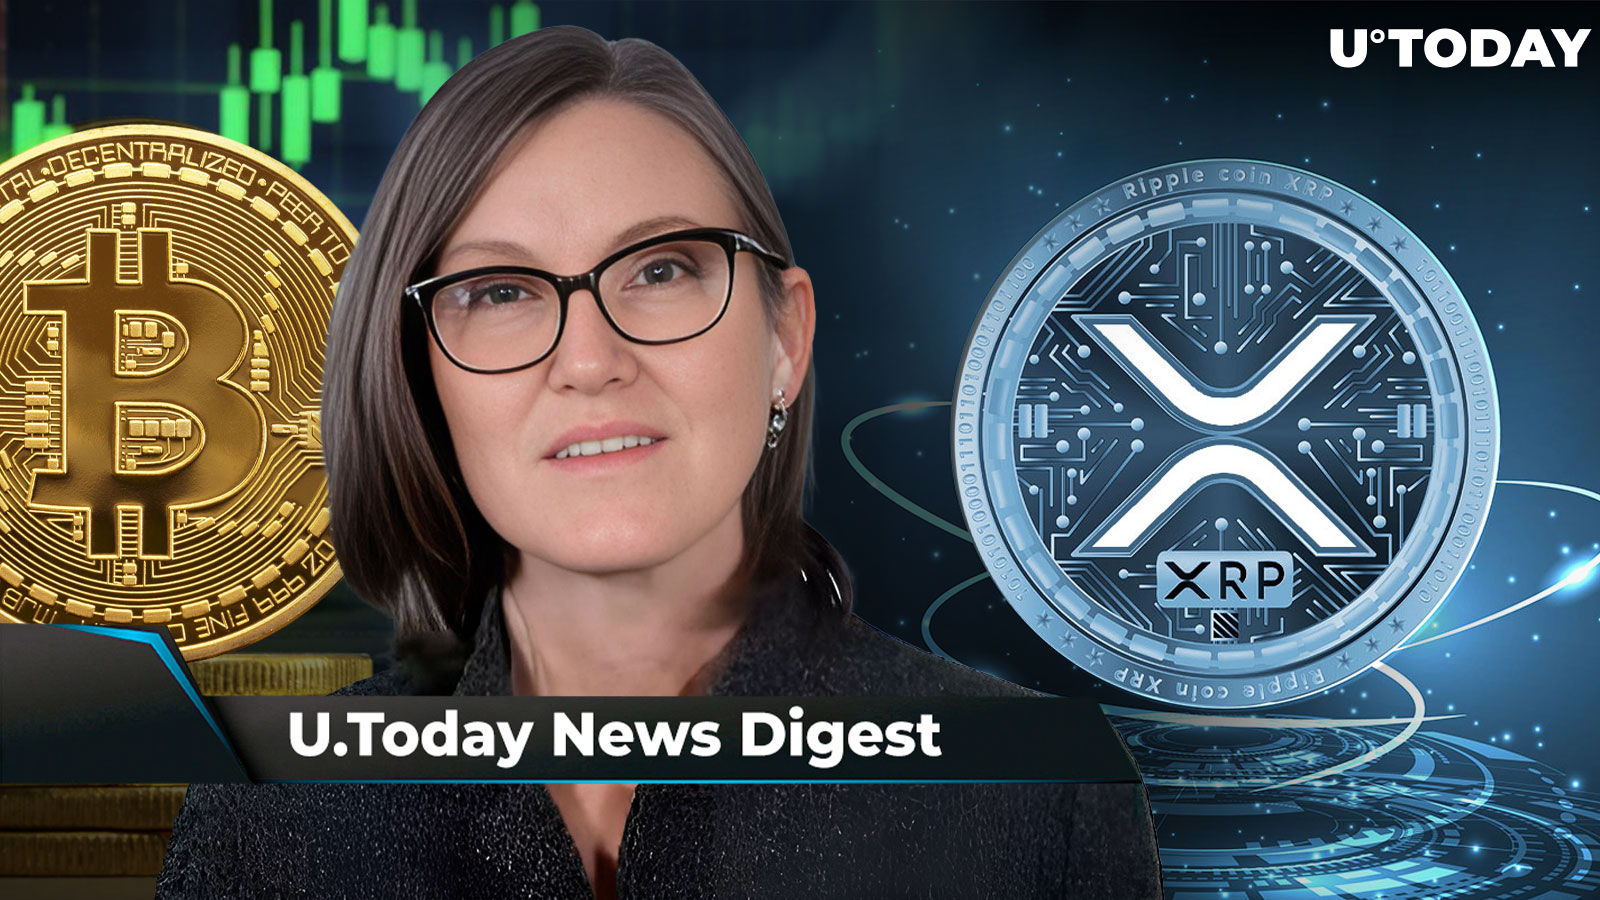 BTC Predicted to Reach $600,000 by Cathie Wood, XRP Relisted on Major Exchange, SHIB Rep Explains Why ShibaSwap 2.0 Not Released Yet: Crypto News Digest by U.Today